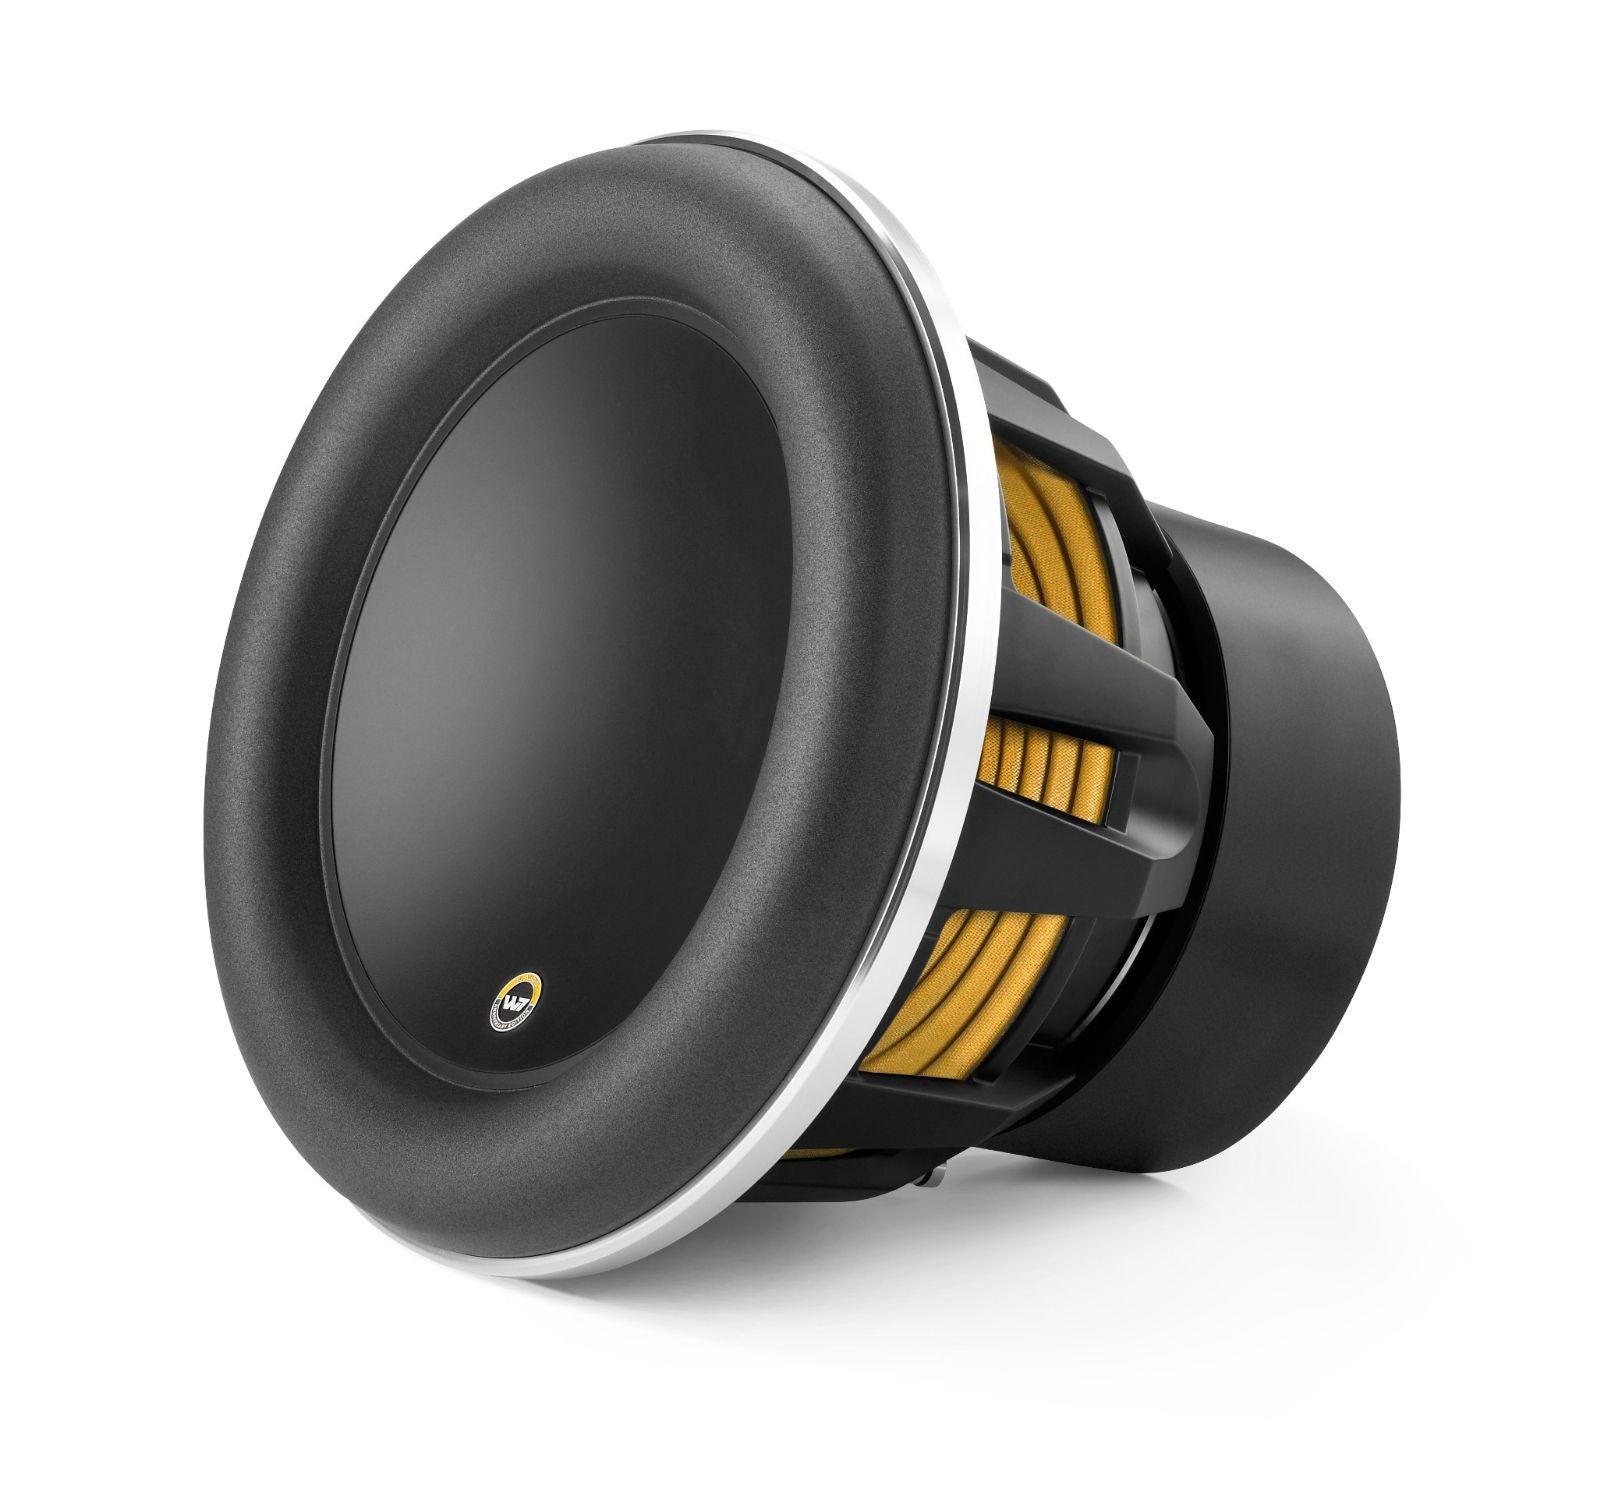 JL Audio 13W7AE-D1.5 Anniversary Edition - 13.5-inch subwoofer driver (1500W, Dual 1.5 ohm voice coils)